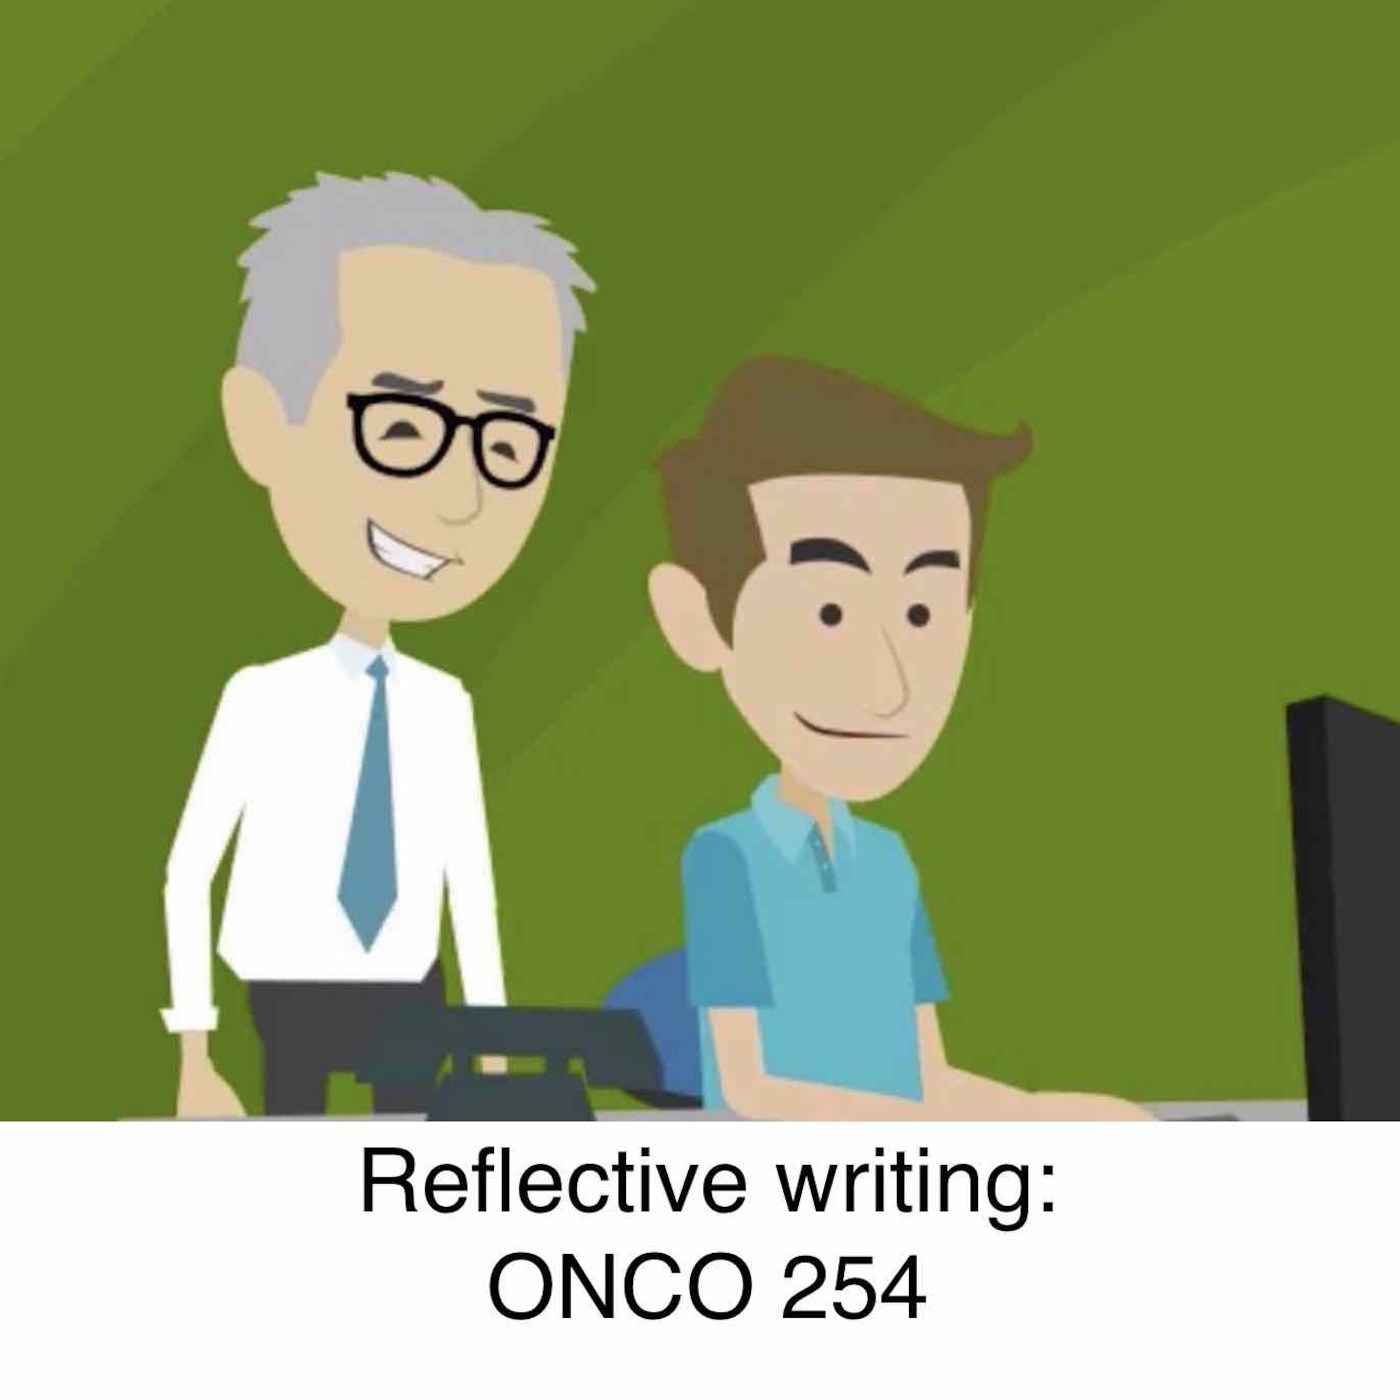 Reflective writing for ONCO 254 Students